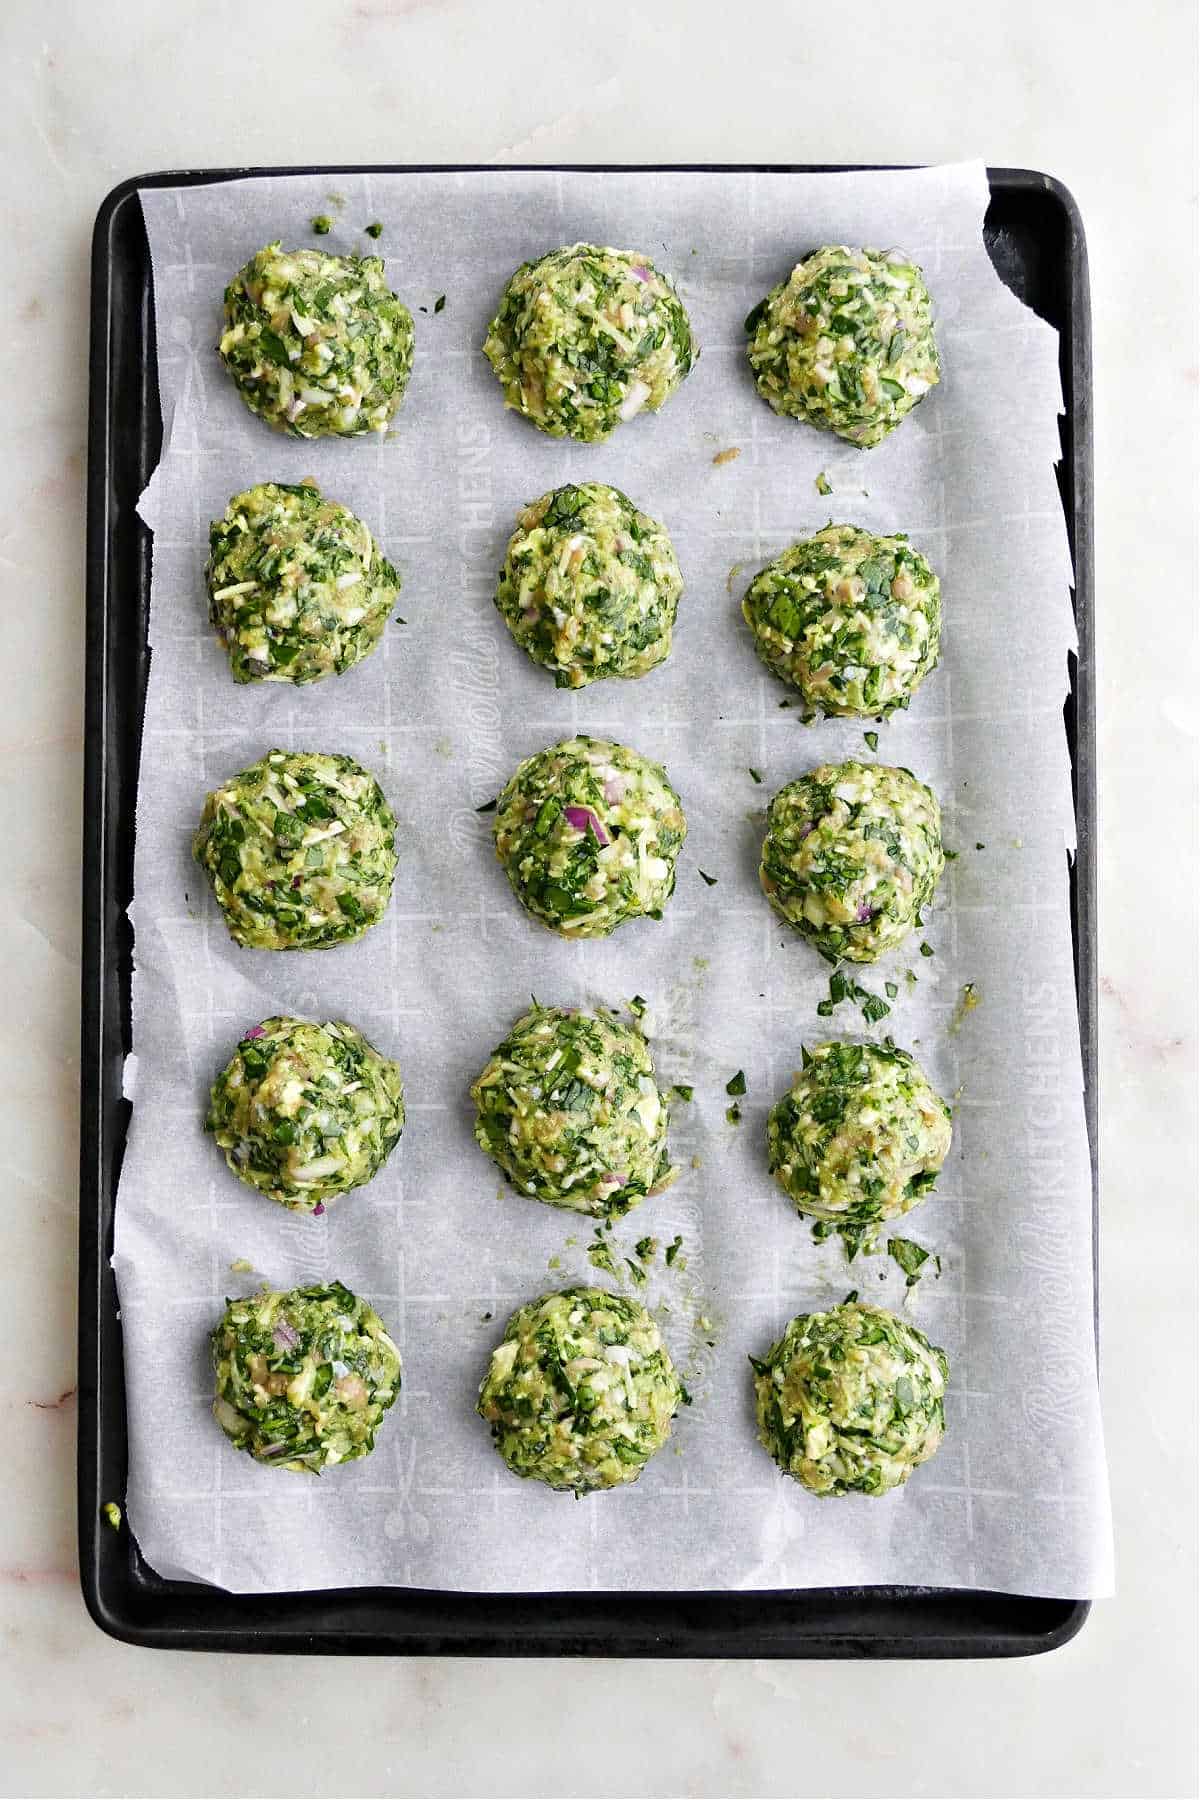 15 spinach chicken meatballs on a baking sheet lined with parchment paper